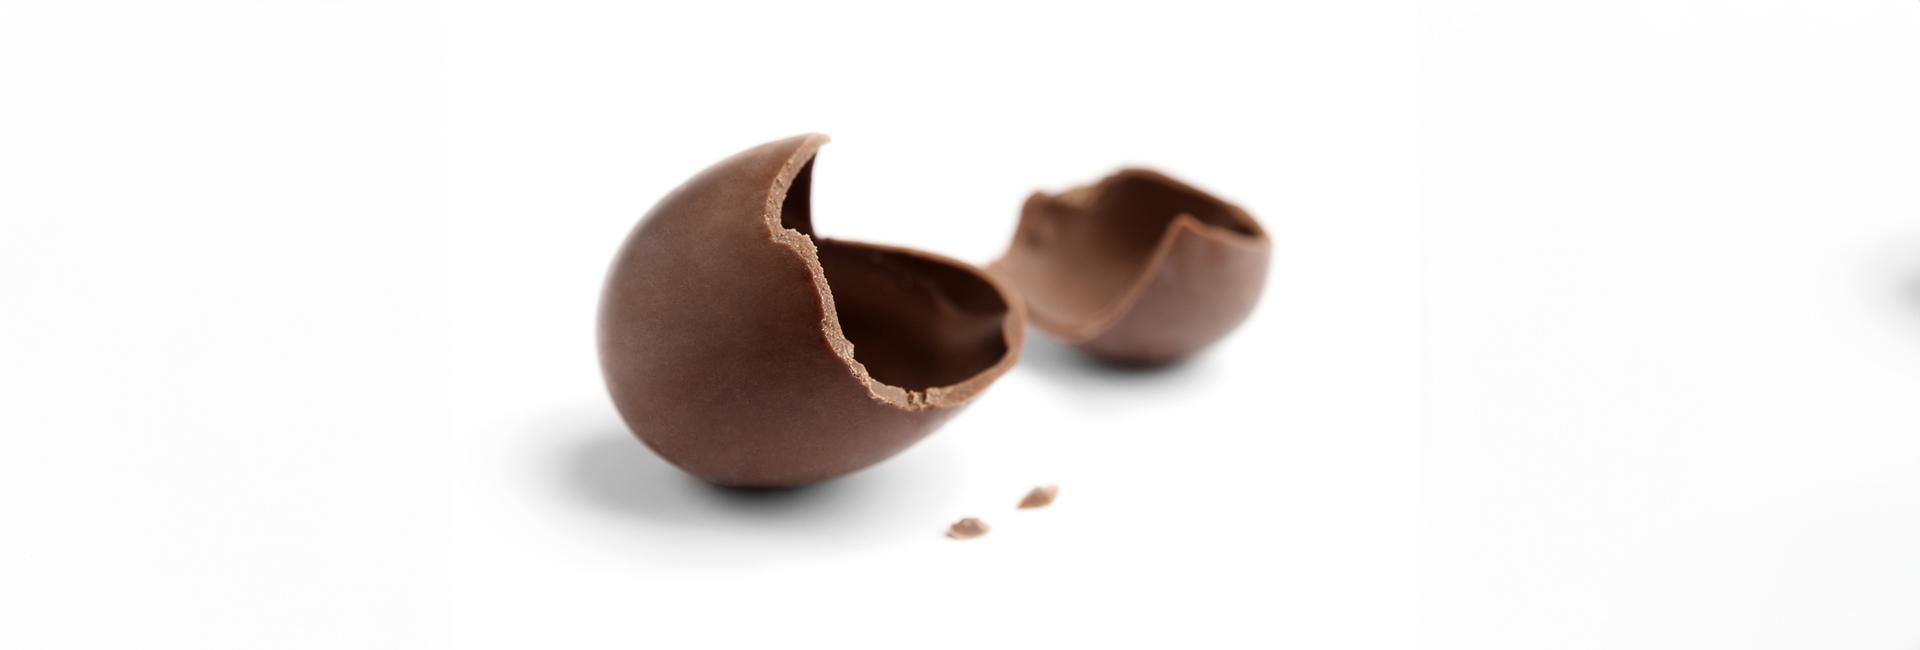 The Truth Inside The Chocolate Egg